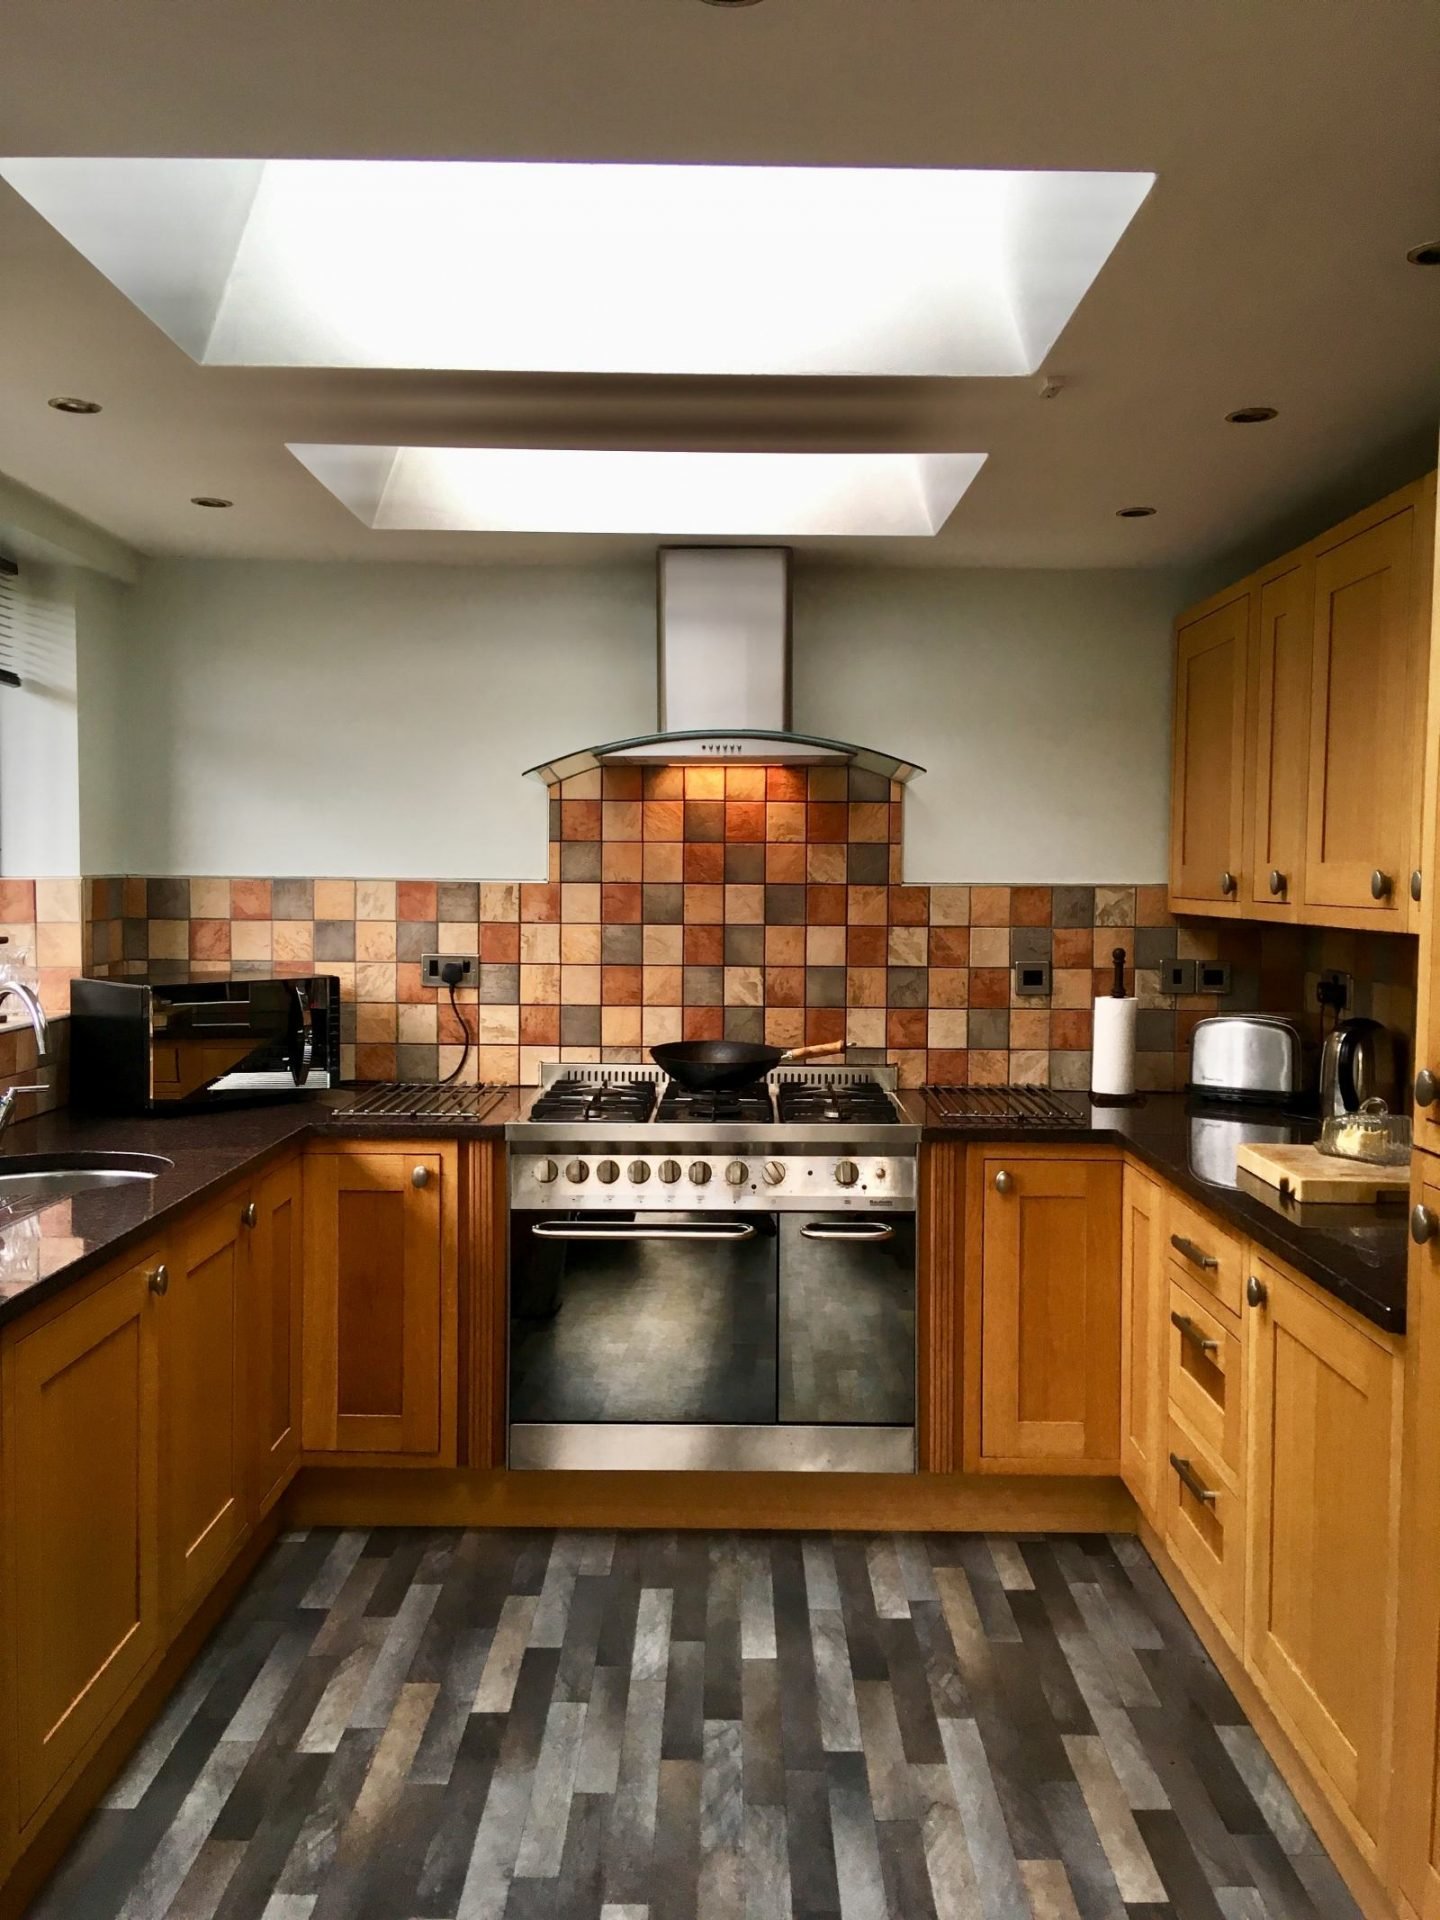 Creating light in a dark kitchen with VELUX Roof windows